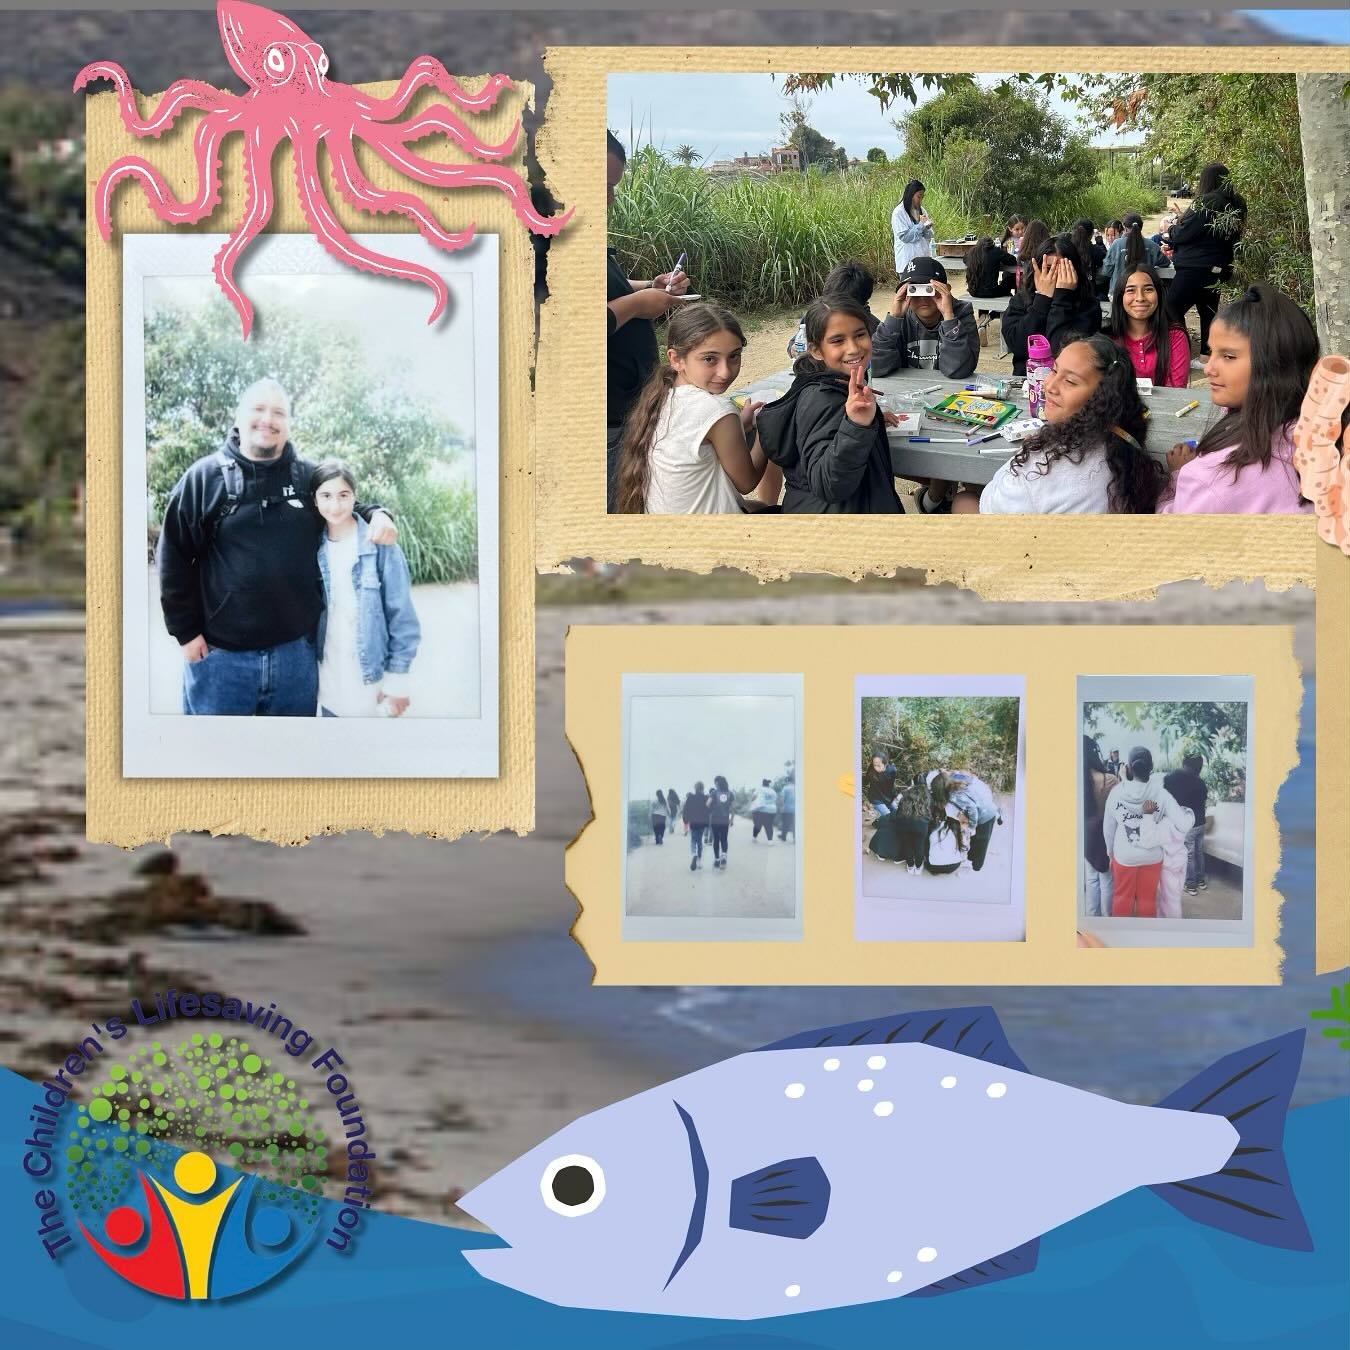 WOW! Yesterday was AWESOME-ANOTHER great marine and wildlife educational field trip with @rcdsmm and 50 wonderful, new students from our great community partners at @lasbestafterschool -at Malibu Lagoon State Beach! The students learned about plankto